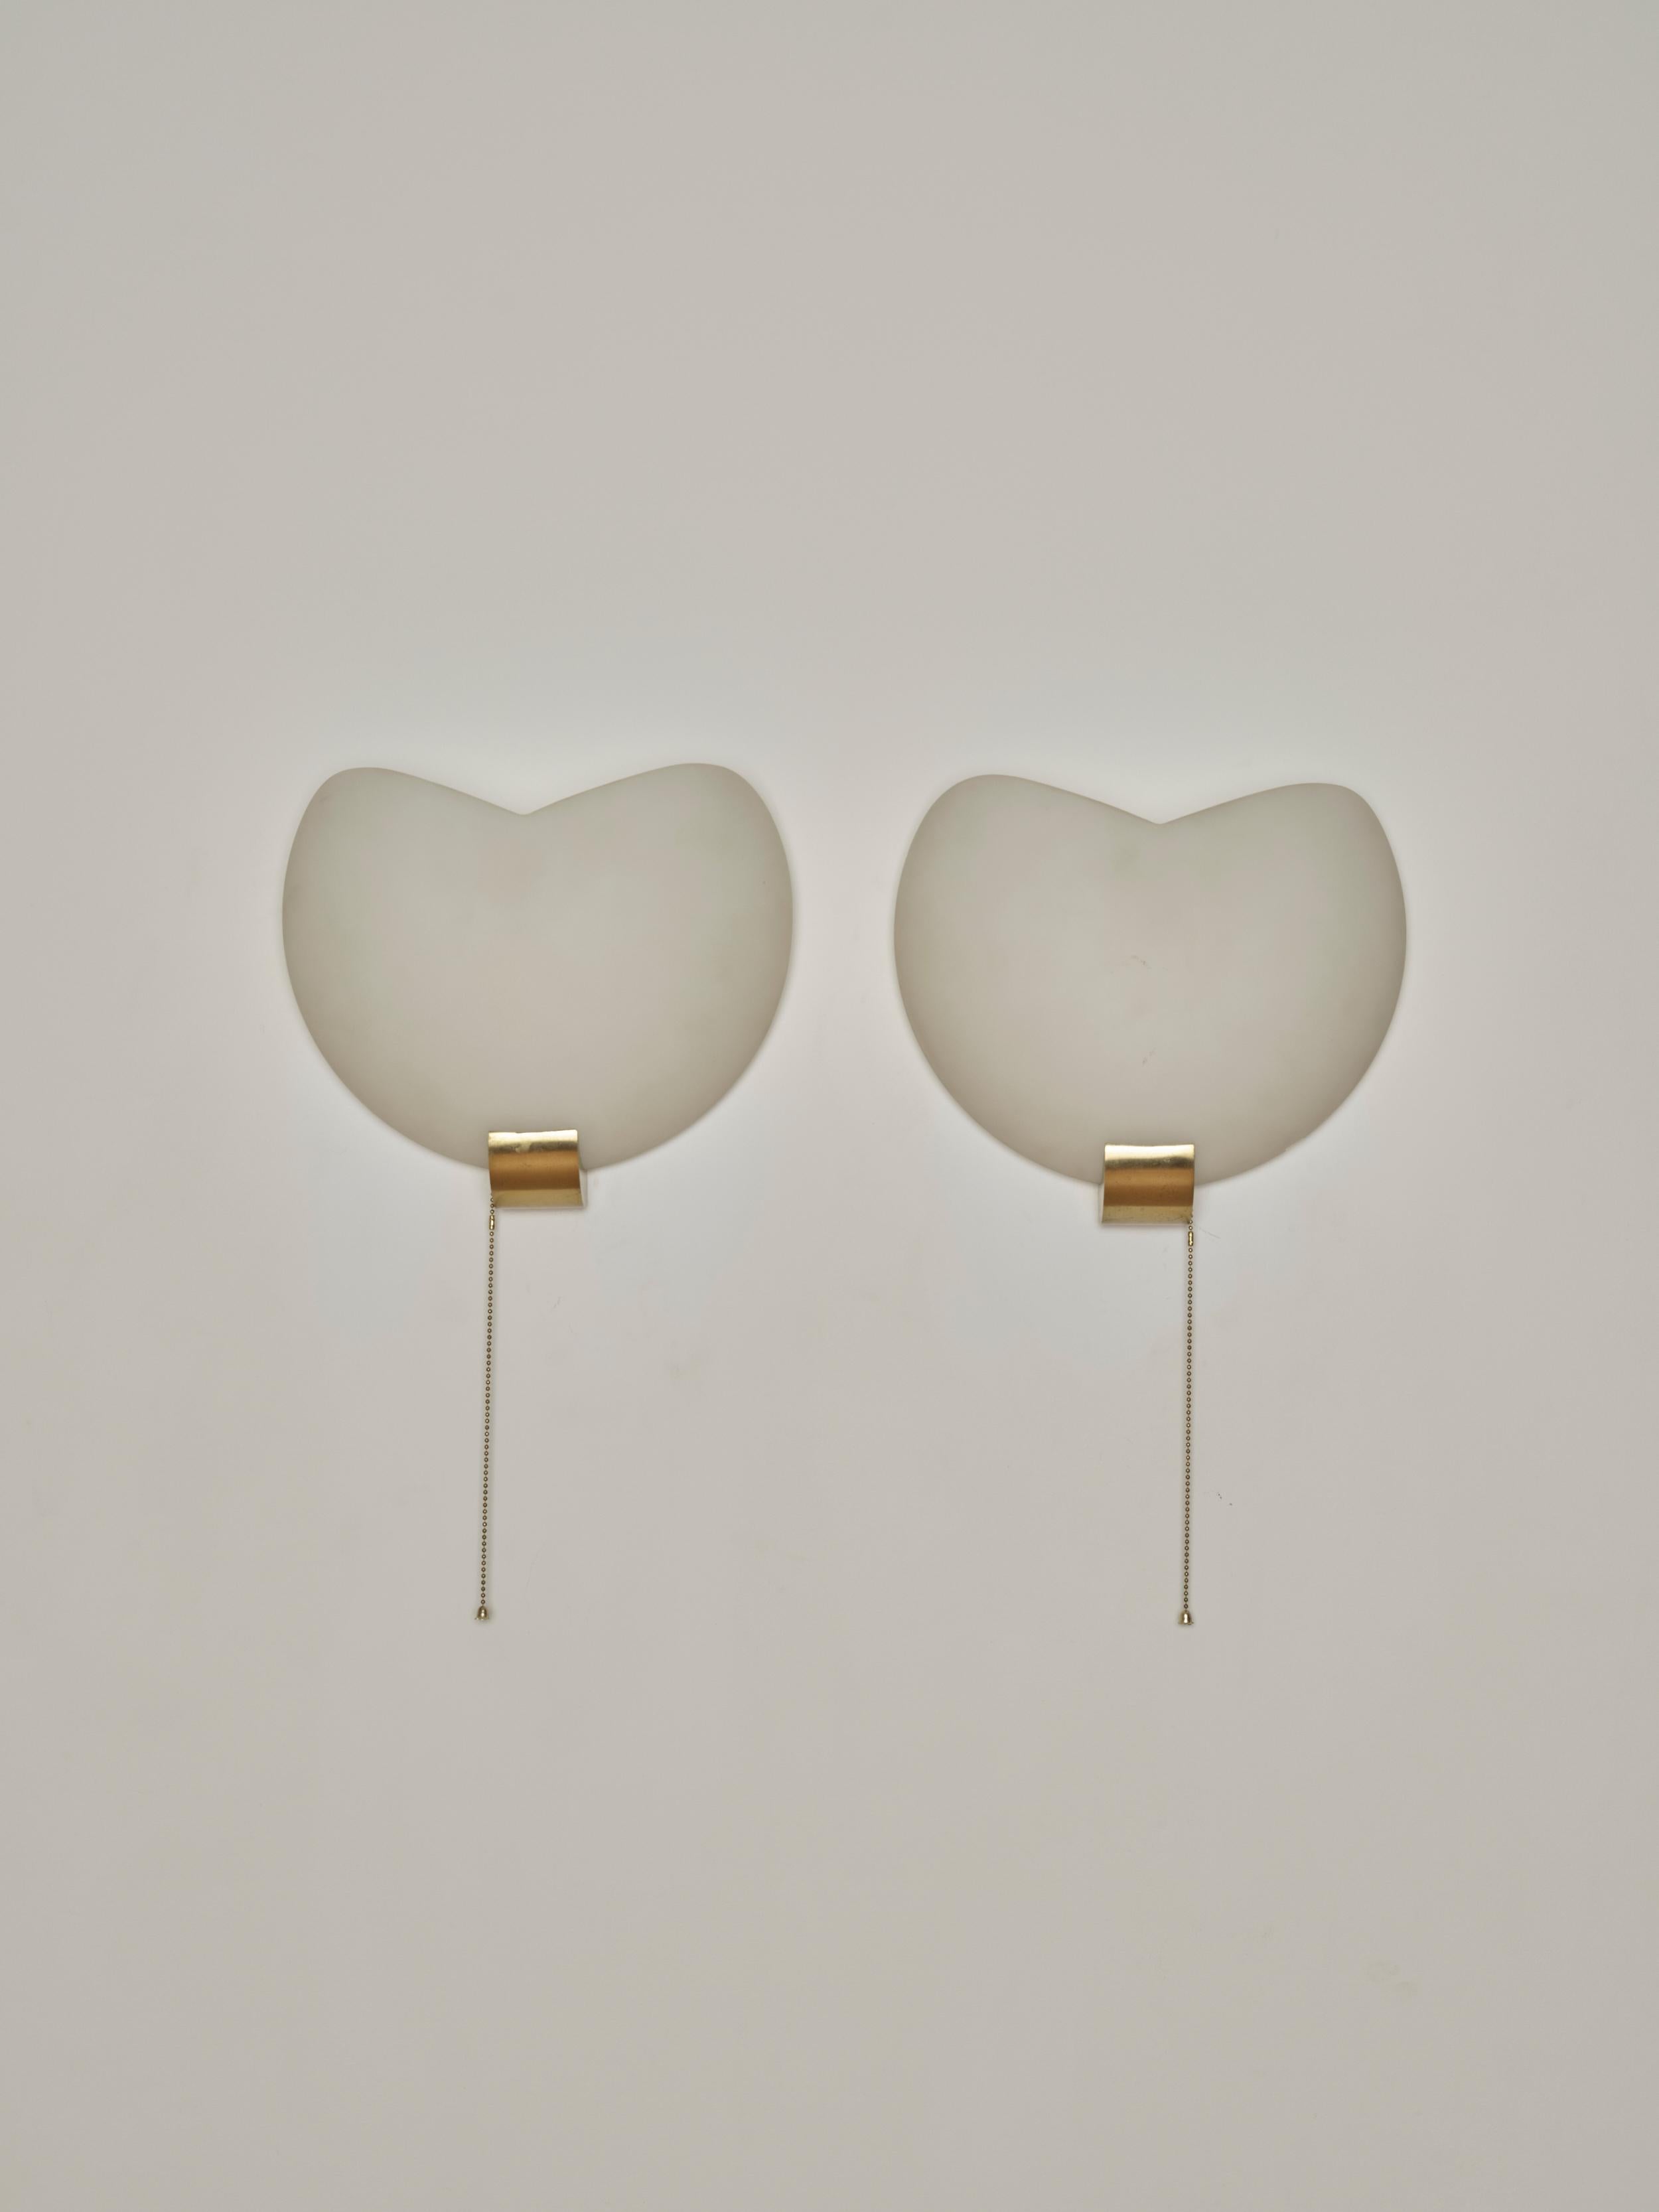 A pair of wall sconces by Jean Perzel in frosted glass with brass and enamel aluminum hardware.

